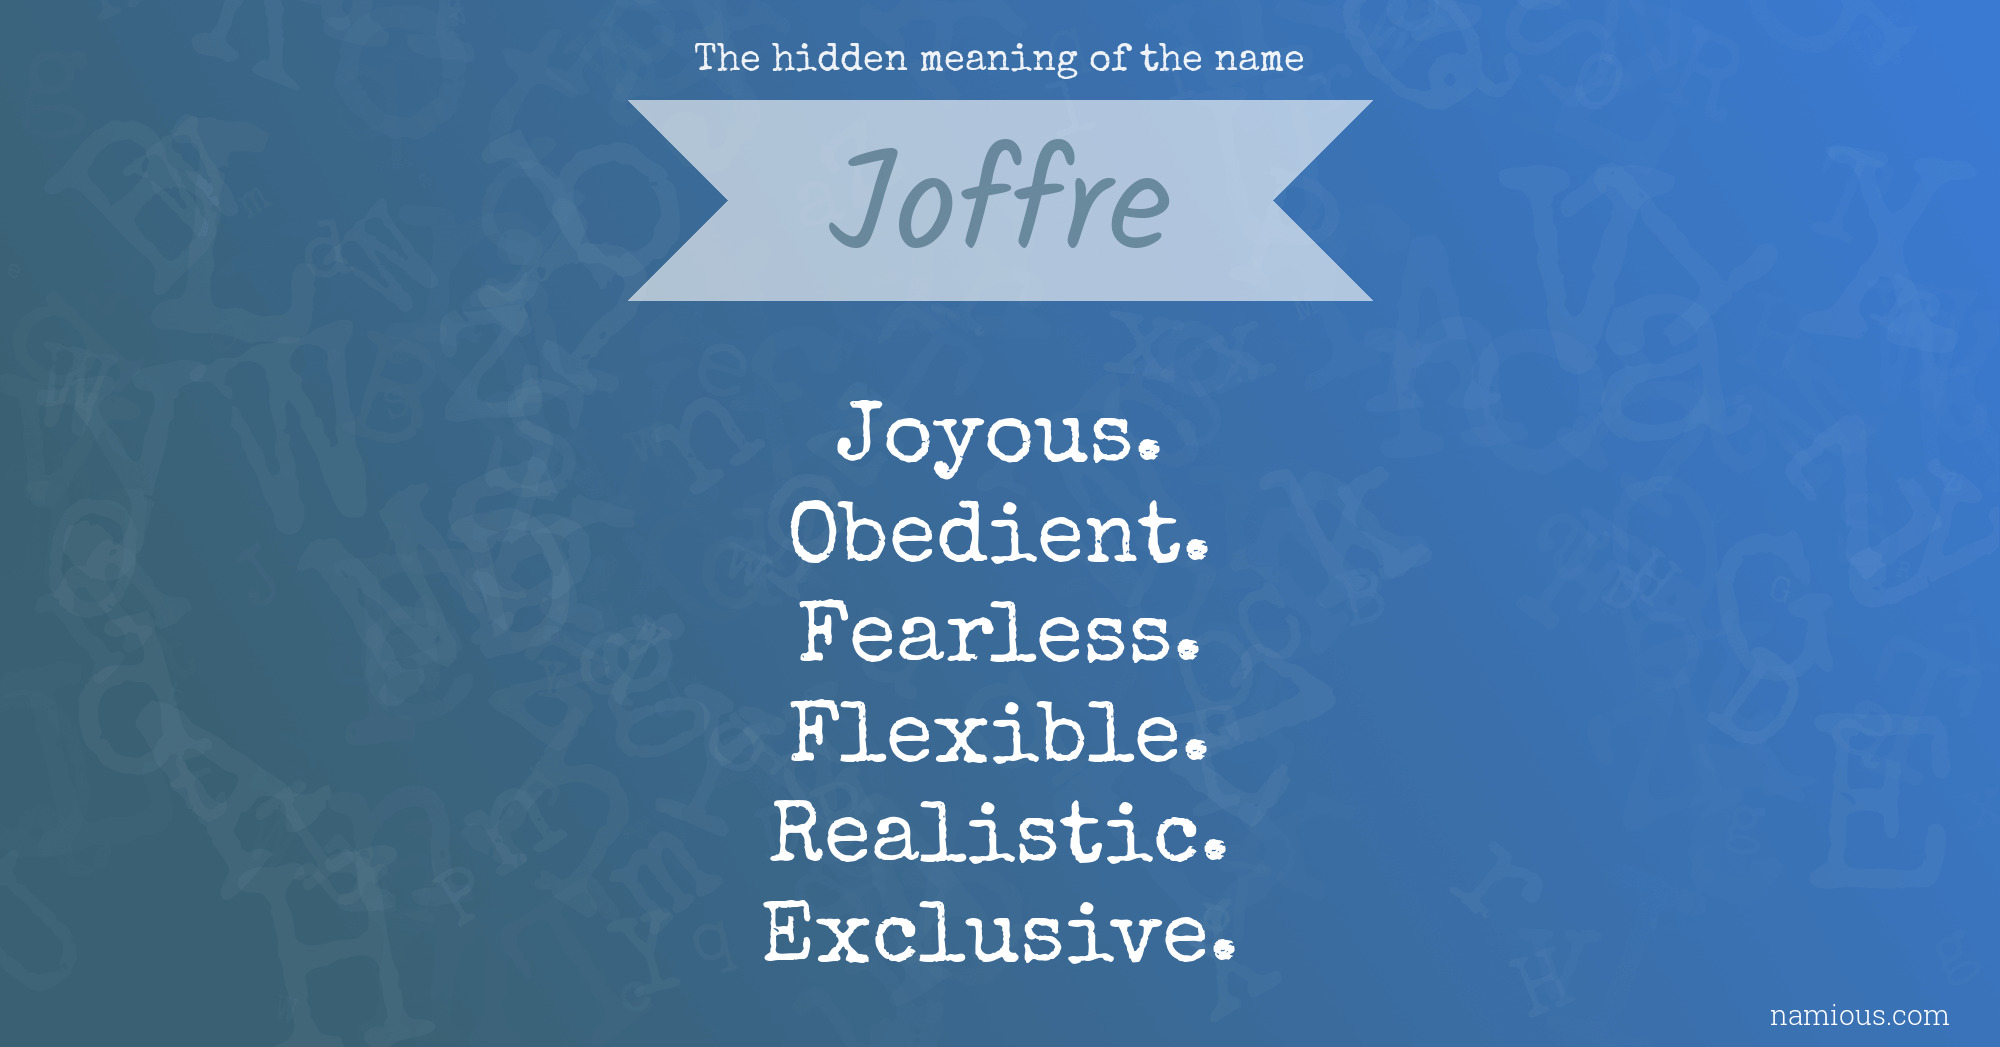 The hidden meaning of the name Joffre